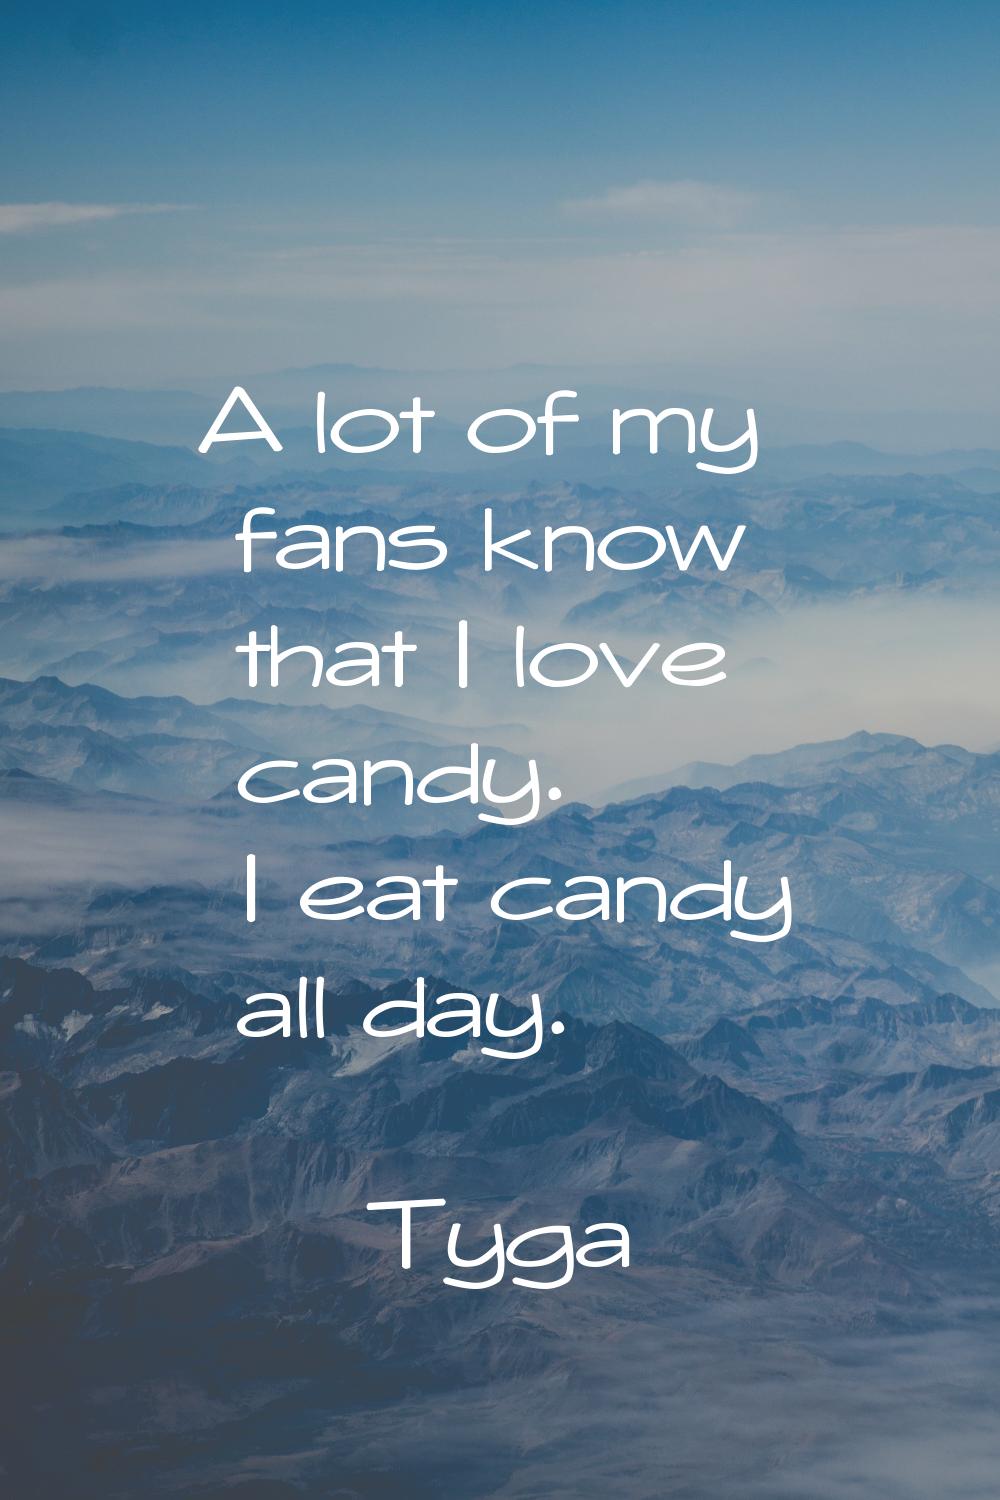 A lot of my fans know that I love candy. I eat candy all day.